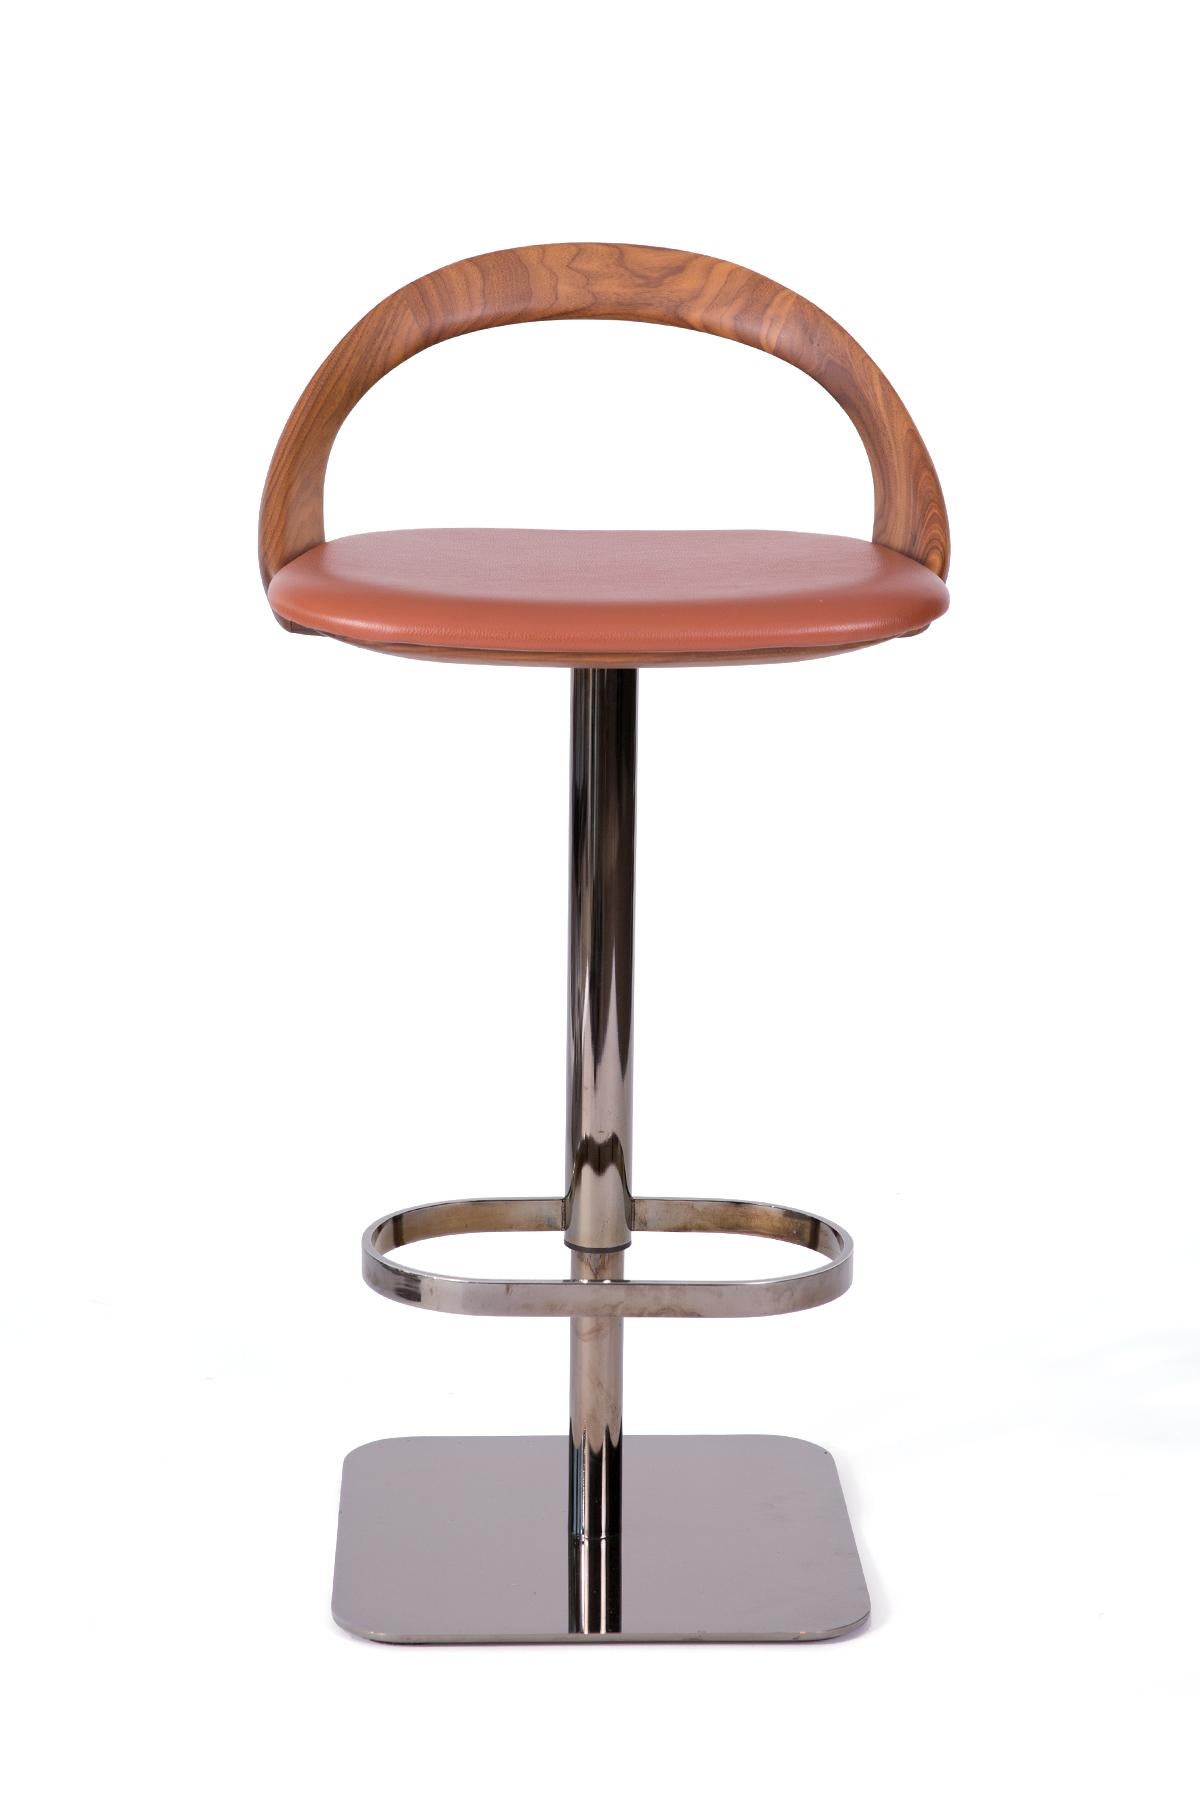 Three ester bar stools designed by Stefano Bigi for Porada are beautifully shaped swiveling bar stools with black chromed bases. The seats feature solid Canaletta walnut frames, gently arching backs and caramel orange leather upholstery. The